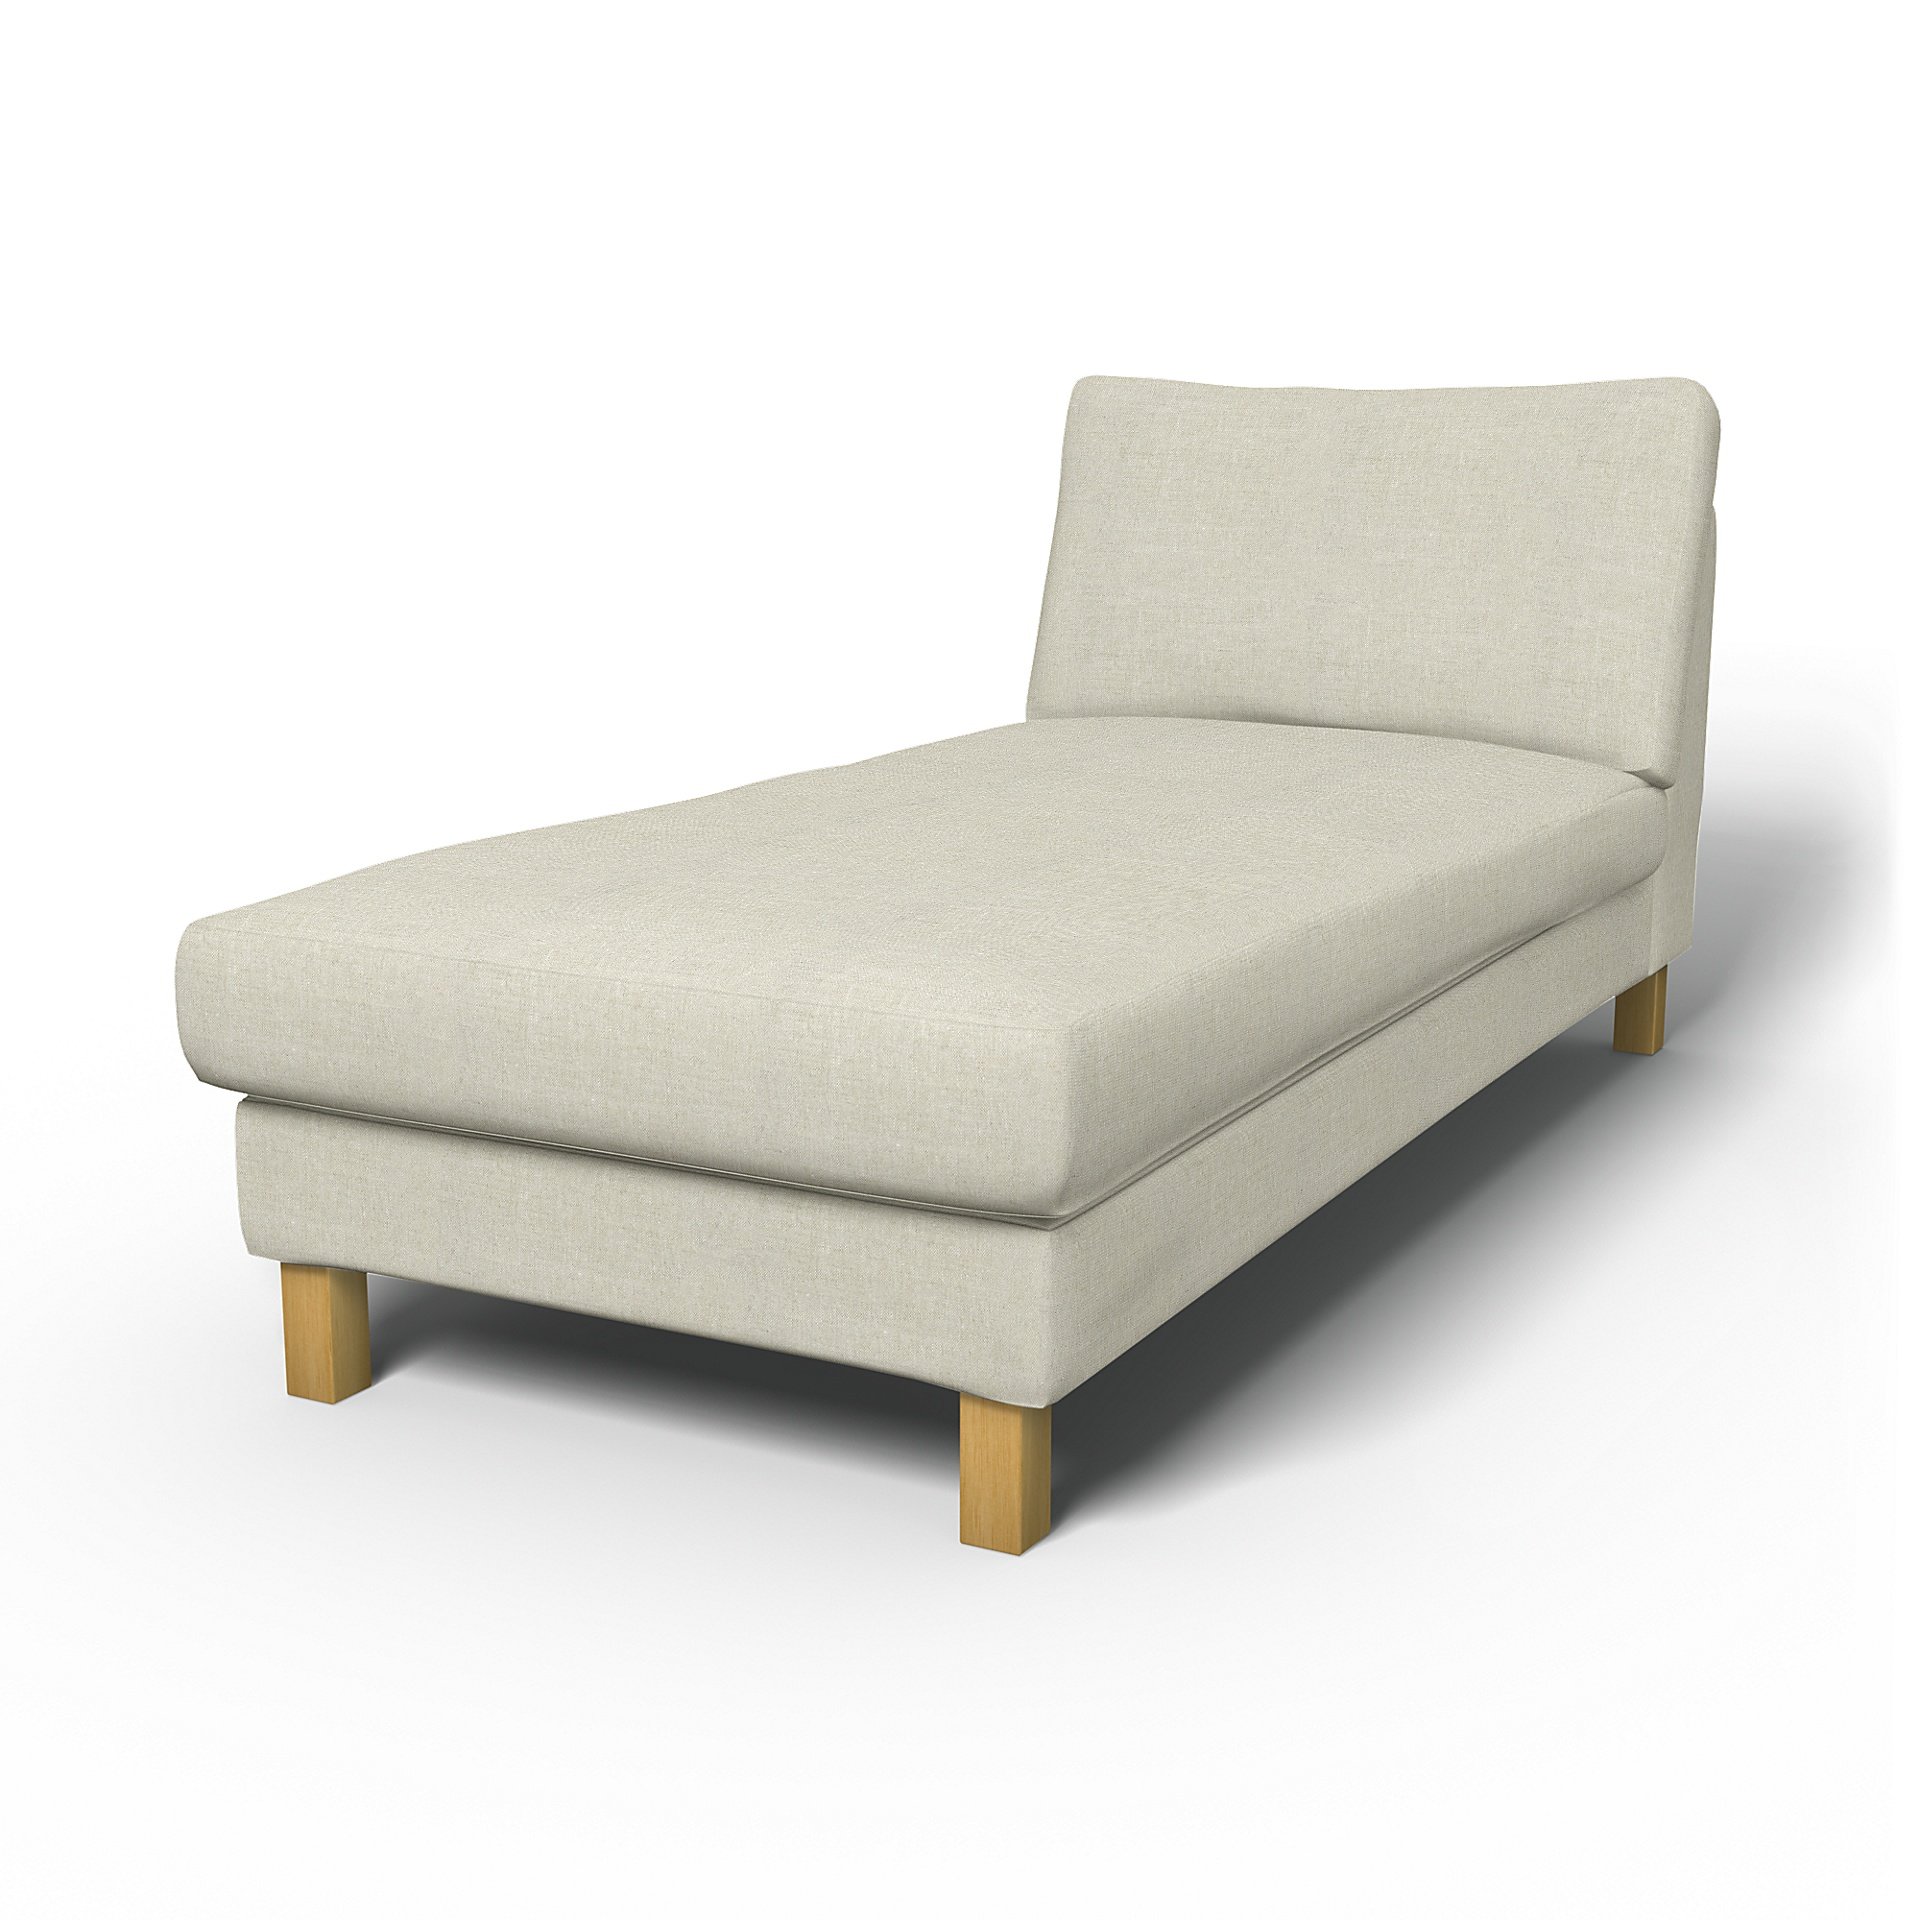 IKEA - Karlstad Stand Alone Chaise Longue Cover, Natural, Linen - Bemz